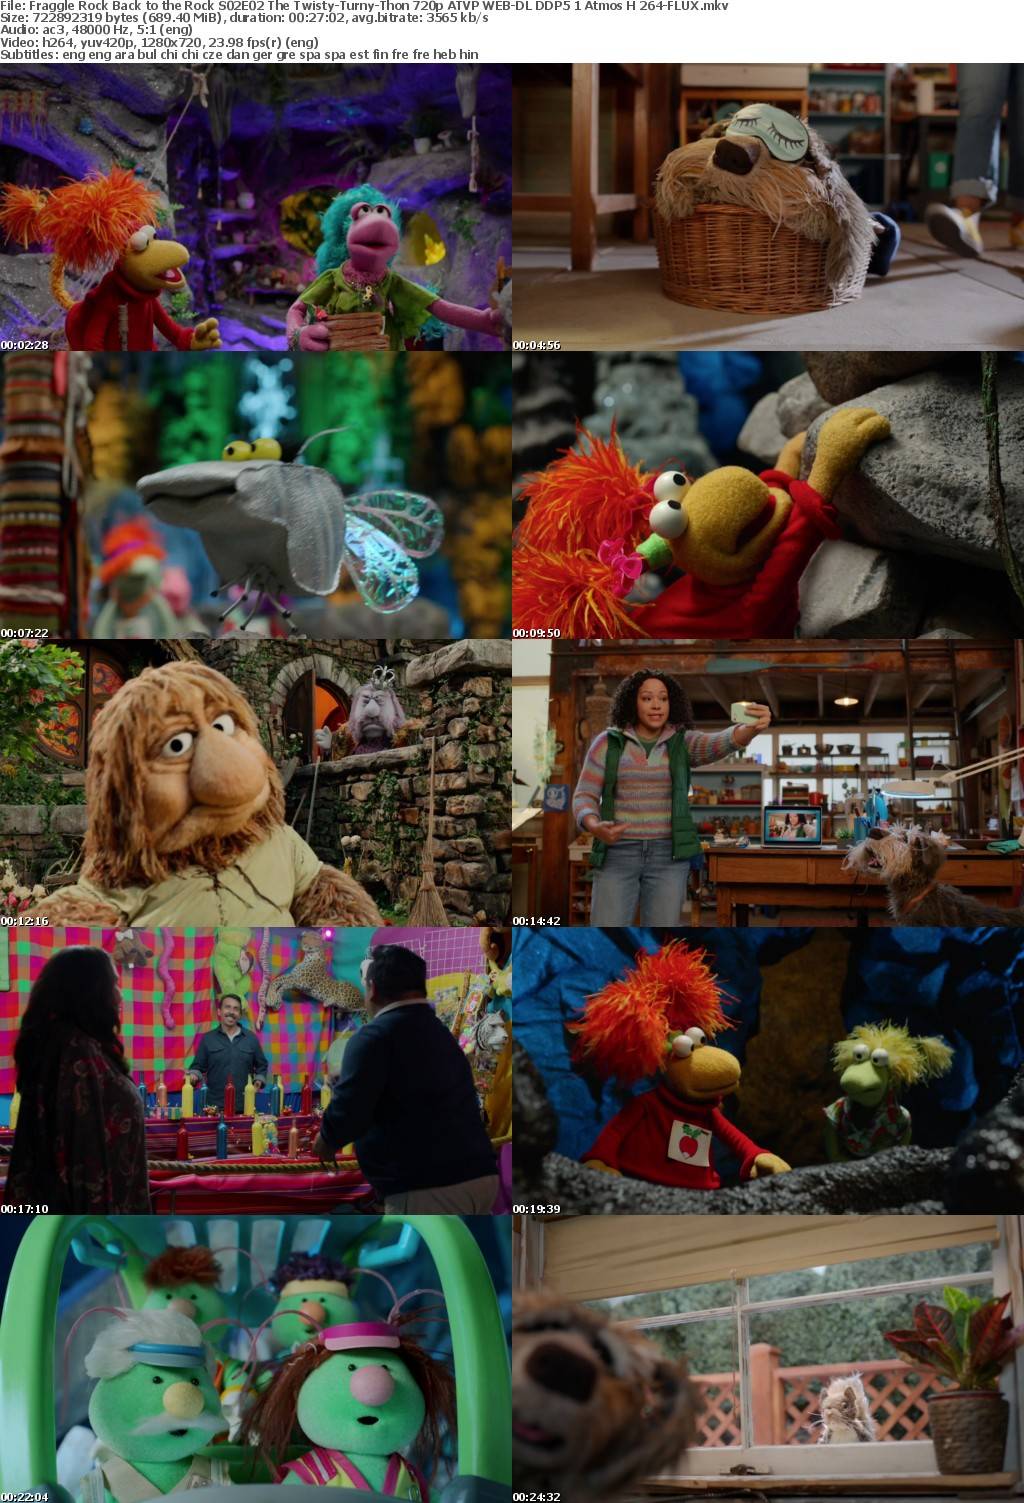 Fraggle Rock Back to the Rock S02E02 The Twisty-Turny-Thon 720p ATVP WEB-DL DDP5 1 Atmos H 264-FLUX